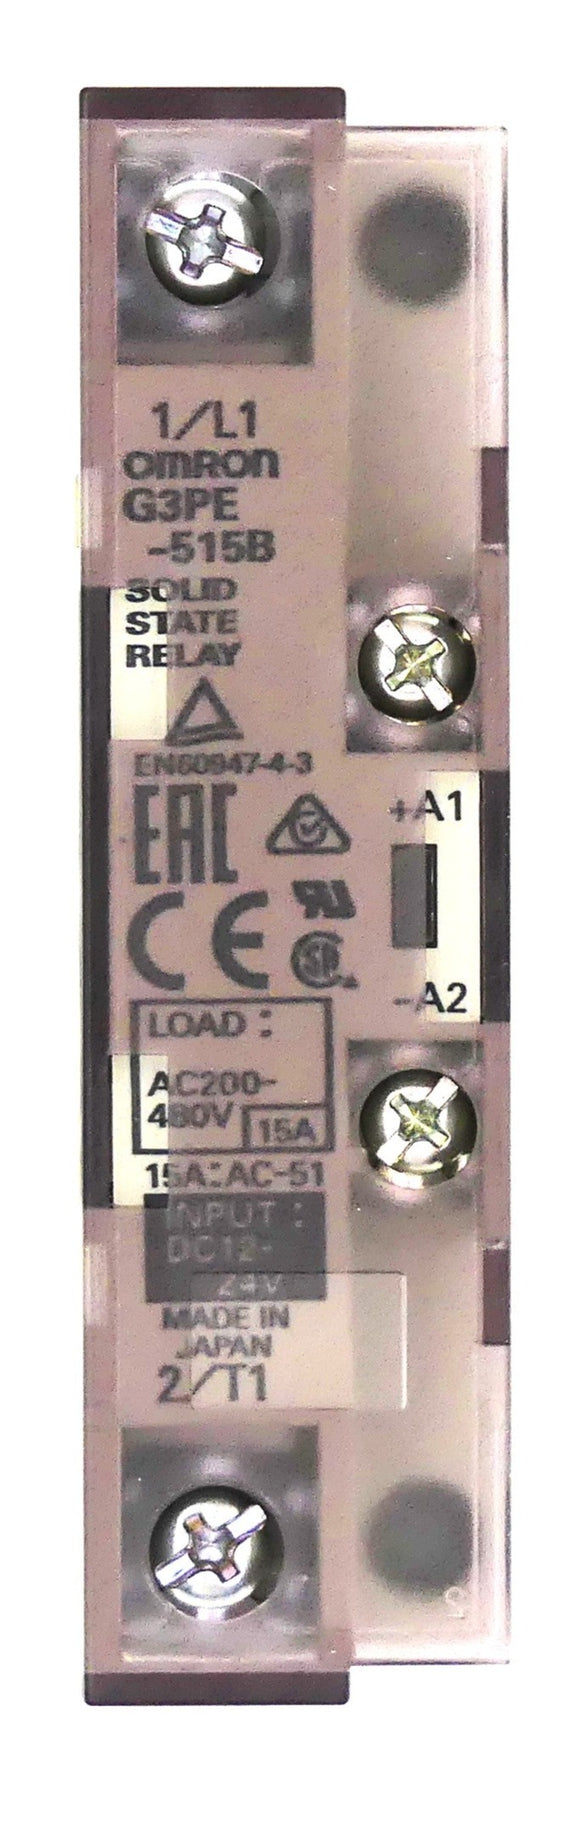 Omron G3PE-515B - Solid State Relay